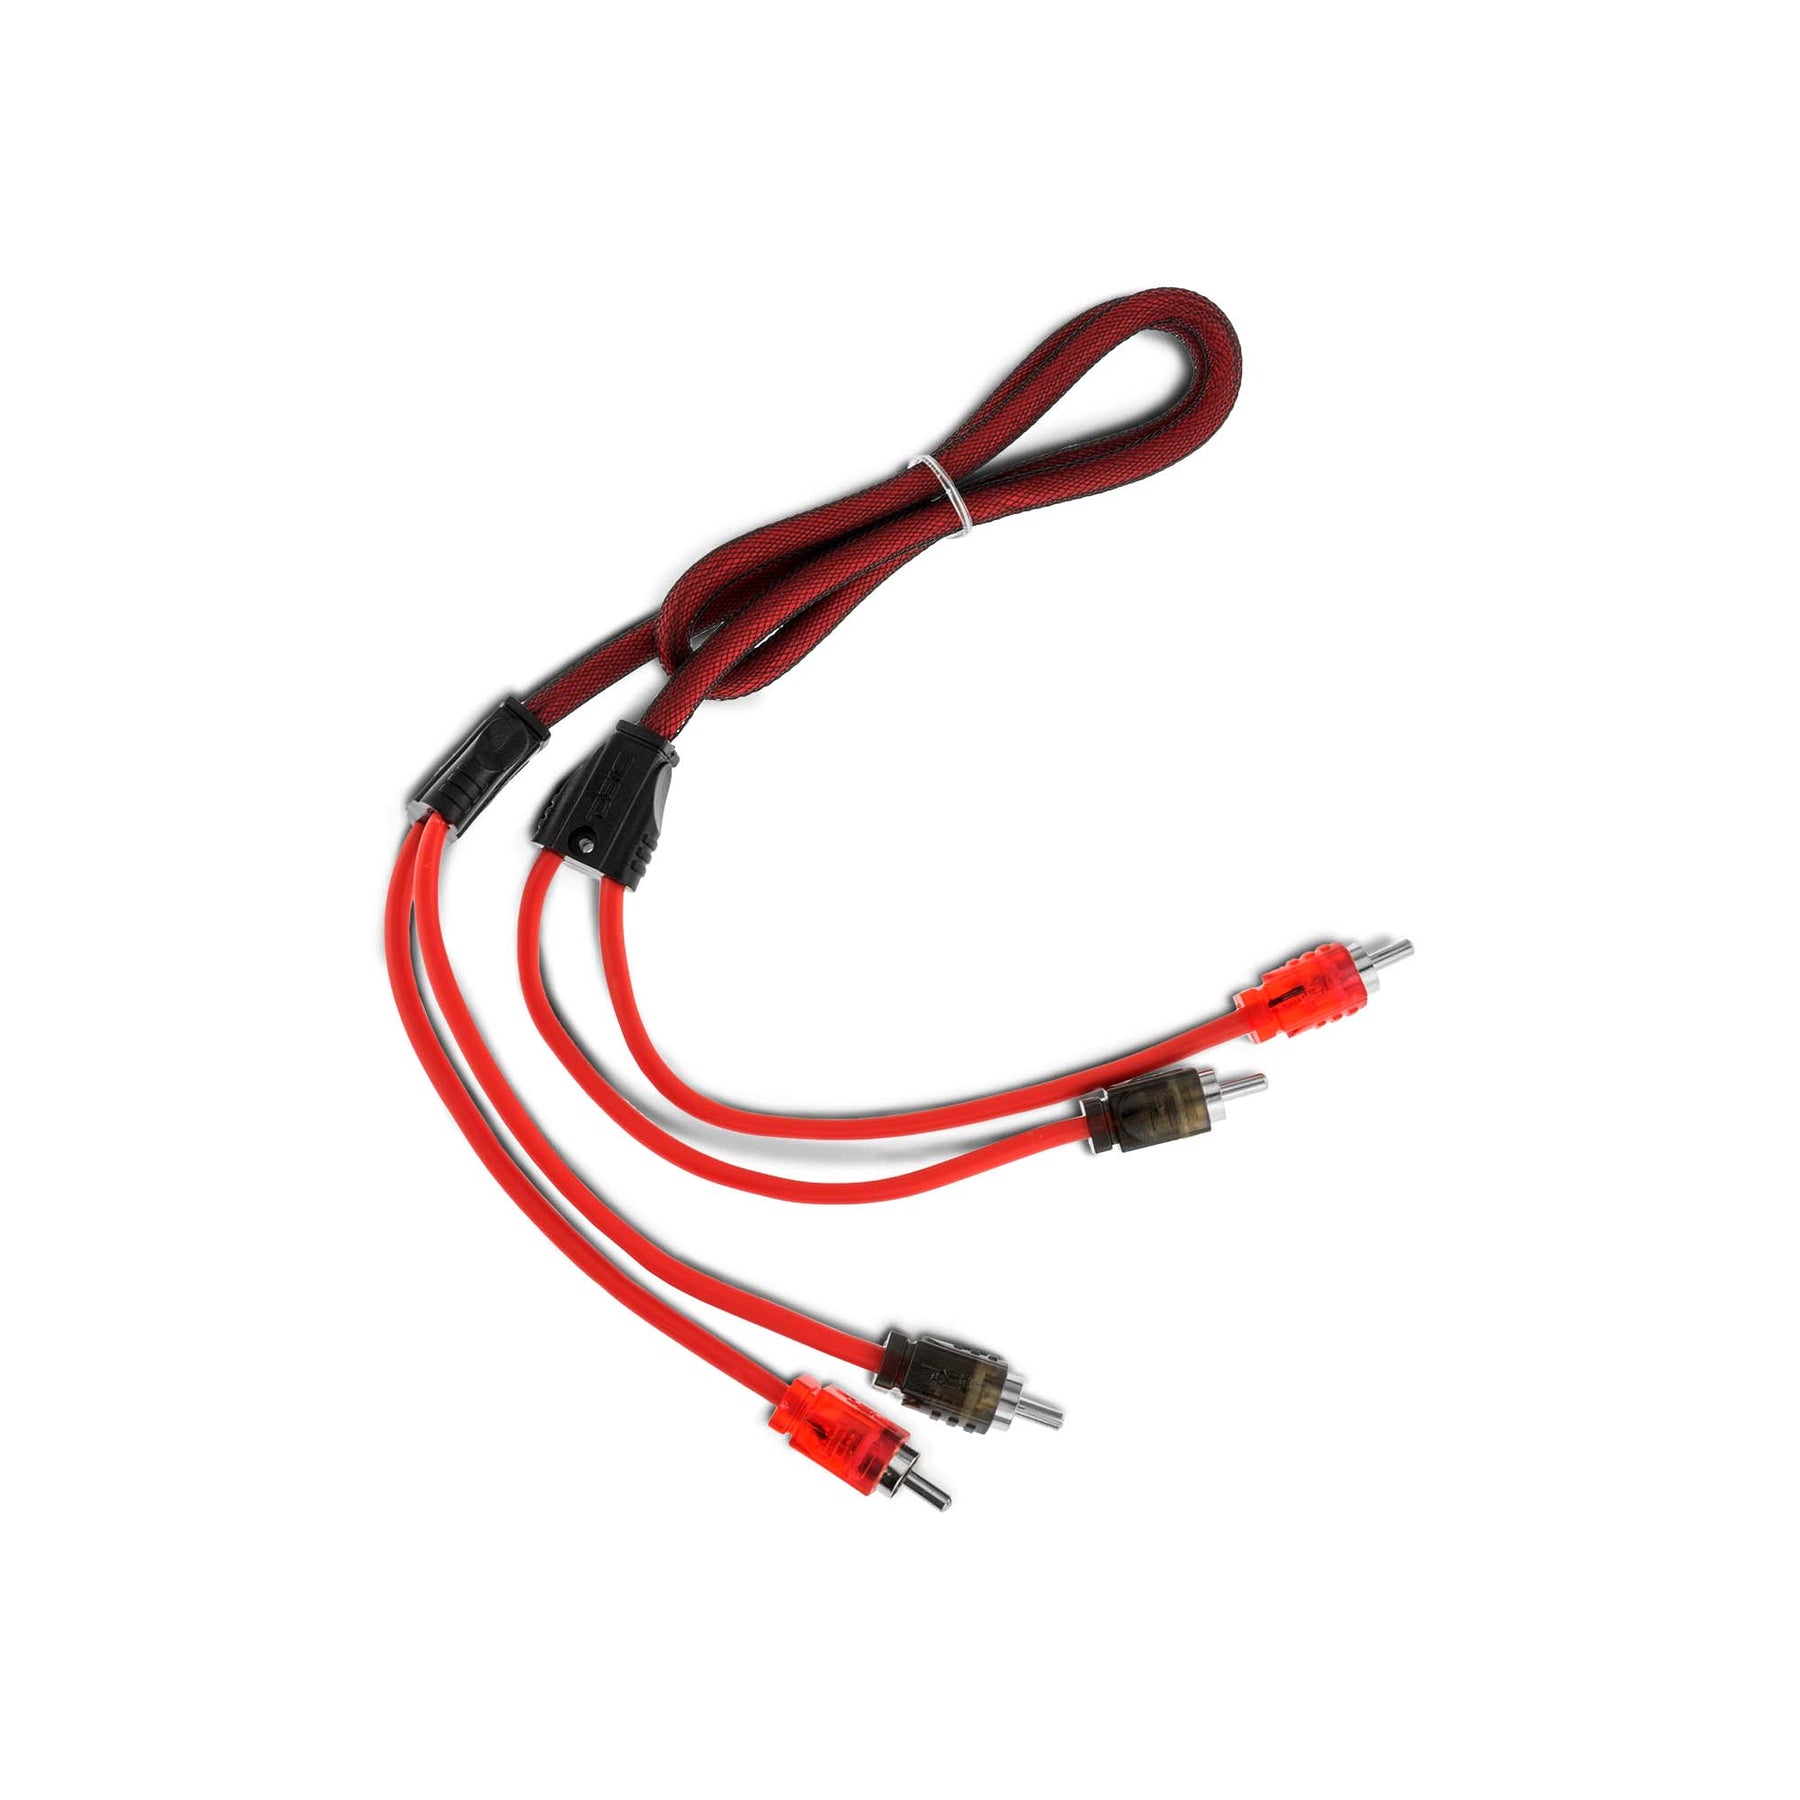 RCA Audio Cables - Dual RCA Cable